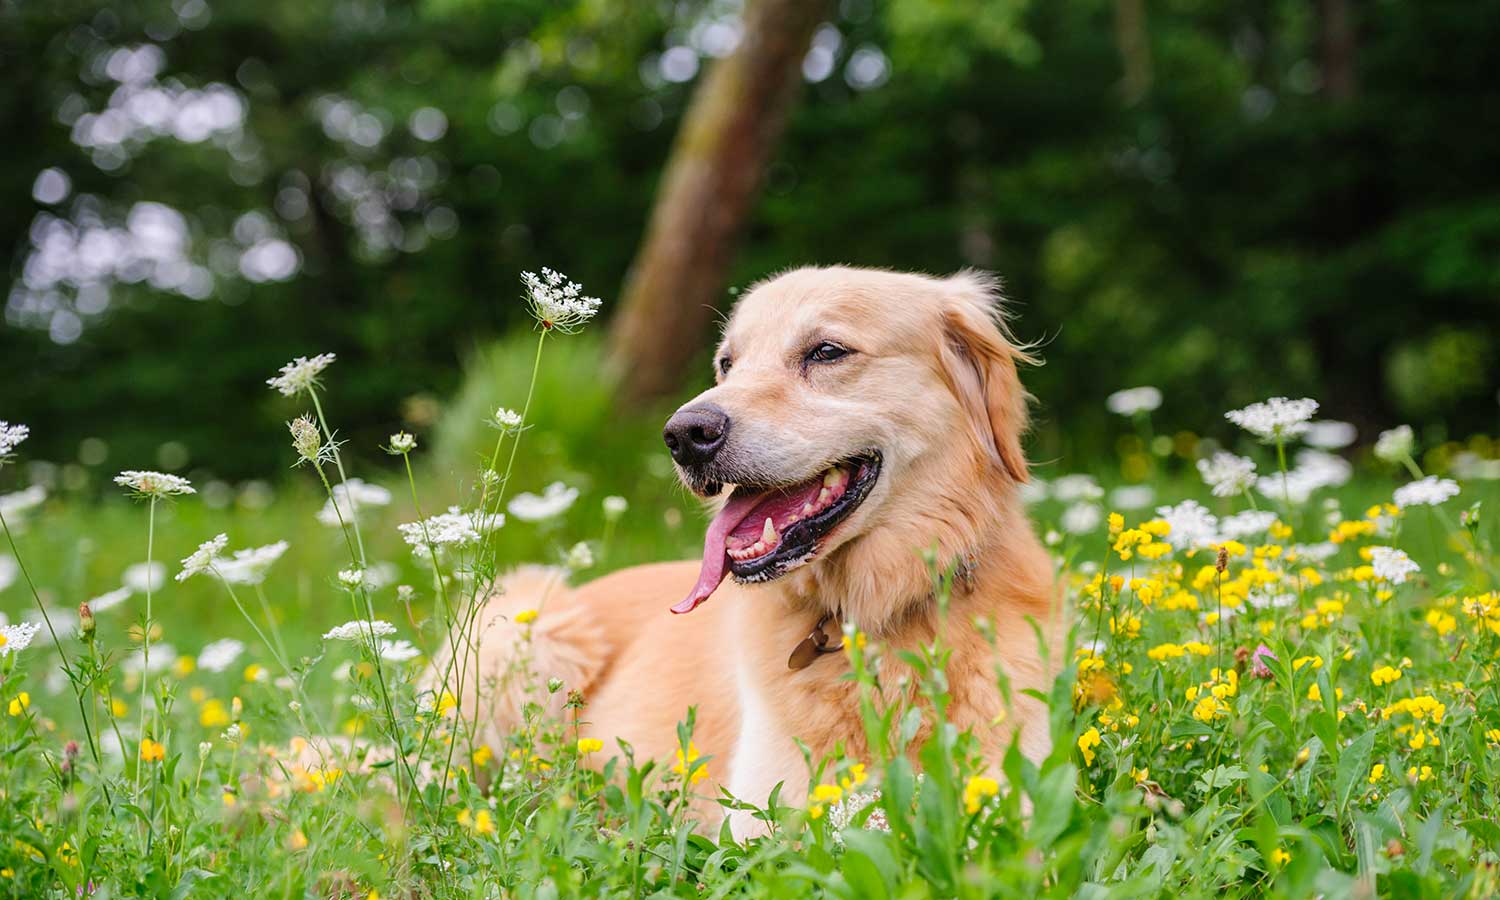 A dog laying in a flowering field